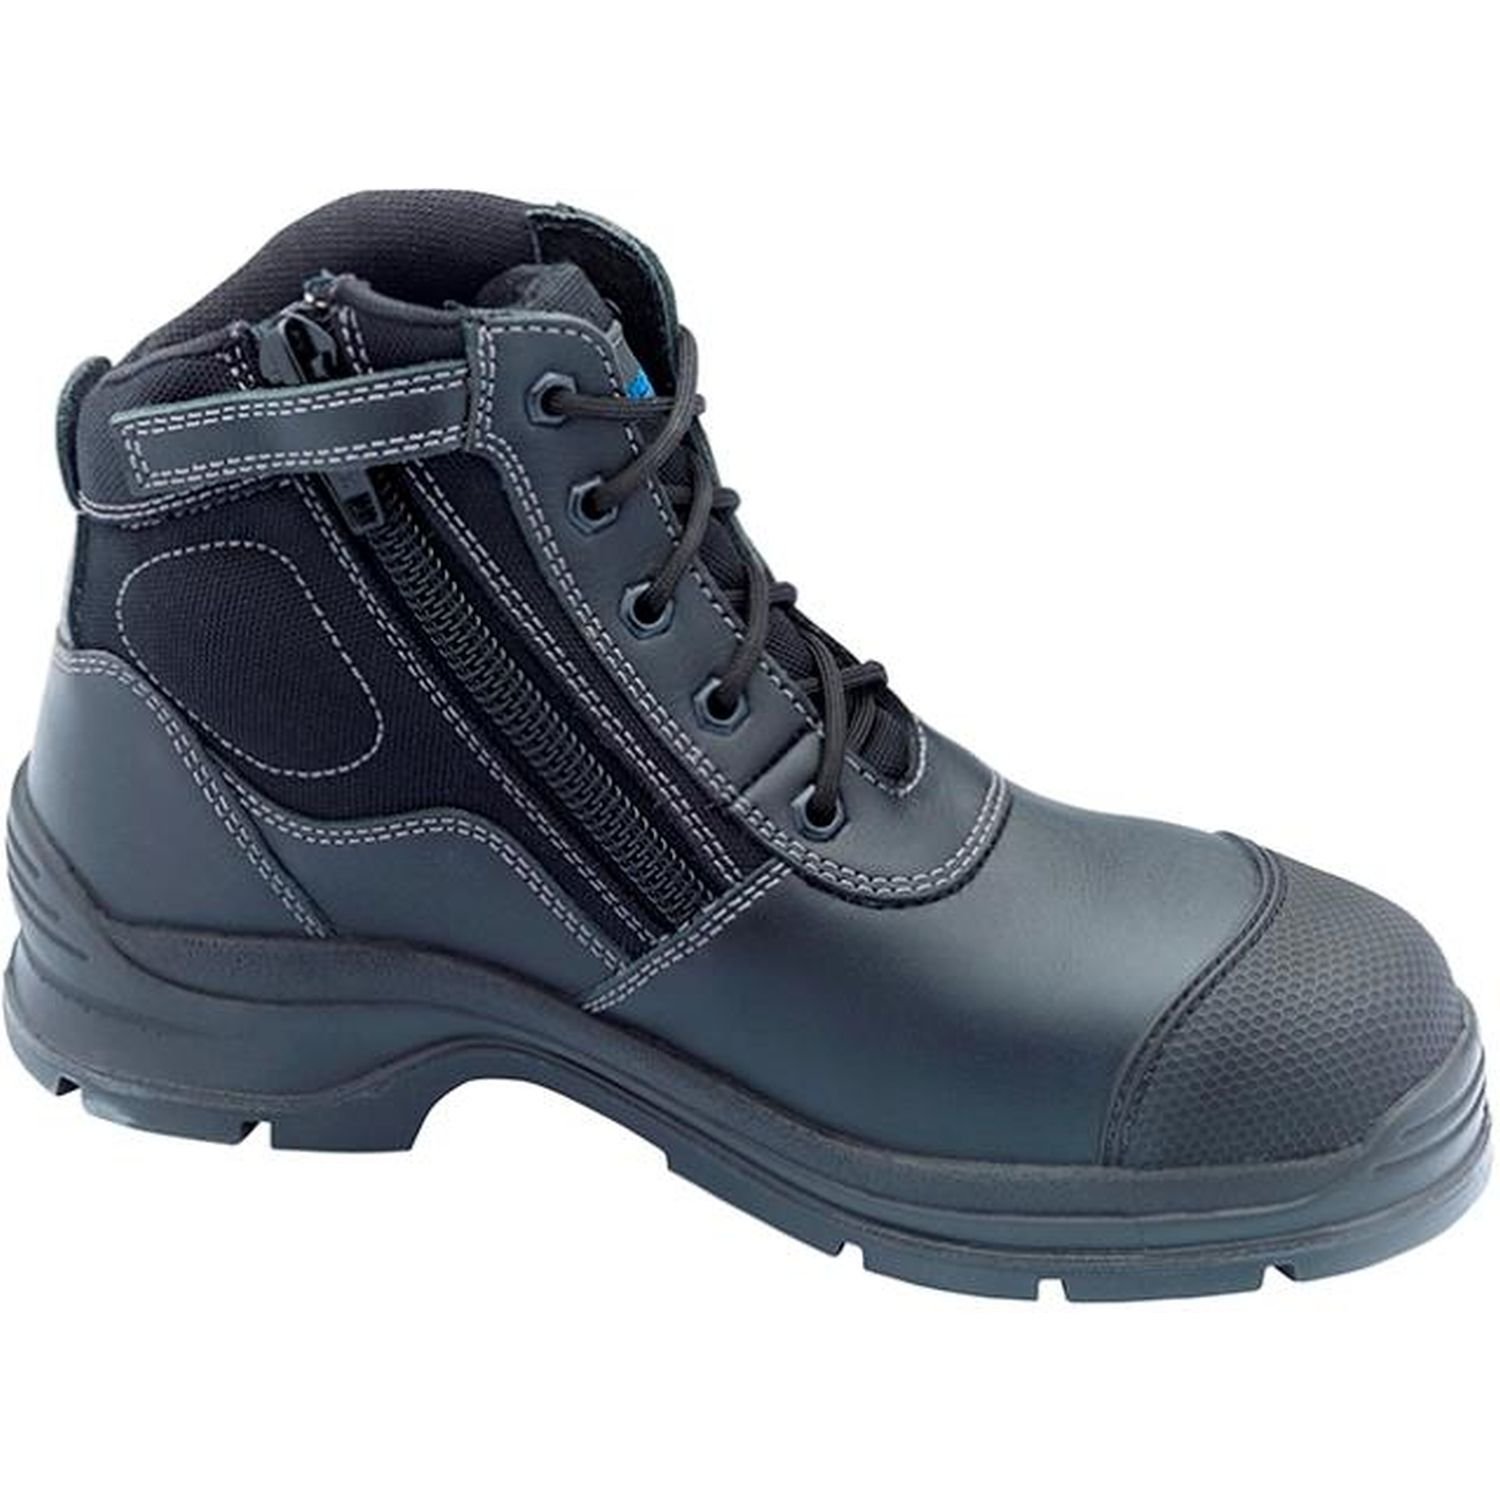 Blundstone 319 Lace Up/Zip Safety Boot Black